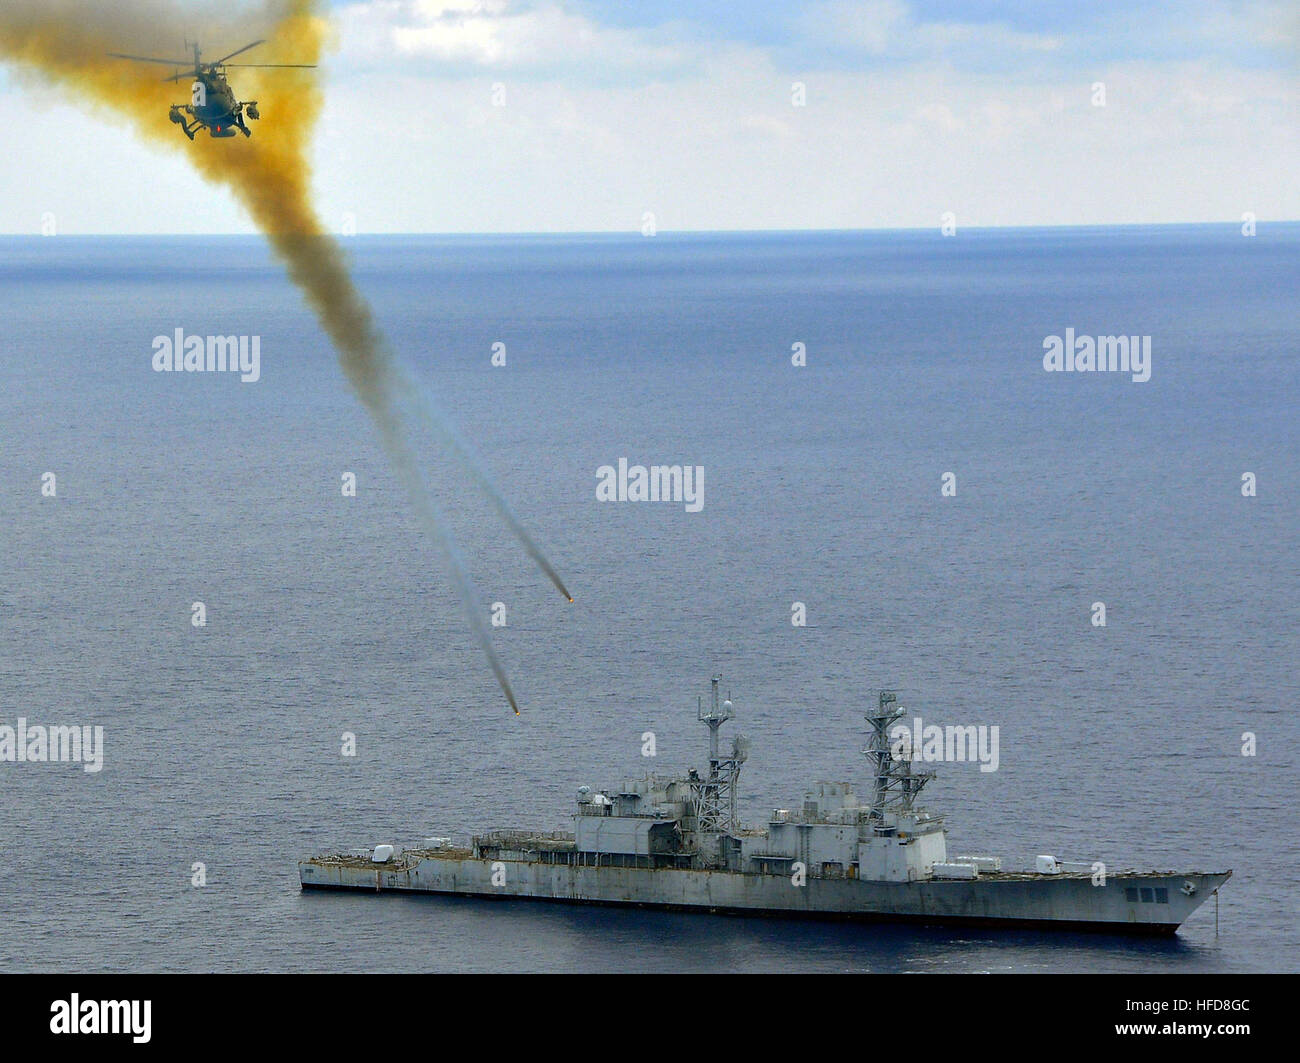 090429-N-0000X-001 ATLANTIC OCEAN (April 29, 2009) A Mexican BO-105 Bolkow helicopter fires 2.75 inch high-explosive rockets at the ex-USS Connolly (DD 979) during the sinking exercise portion of UNITAS Gold. This year marks the 50th iteration of UNITAS, a multinational exercise that provides opportunities for participating nations to increase their collective ability counter illicit maritime activities that threaten regional stability. Participating countries are Brazil, Canada, Chile, Colombia, Ecuador, Germany, Mexico, Peru, U.S. and Uruguay. (U.S. Coast Guard photo by Petty Officer Seth Jo Stock Photo